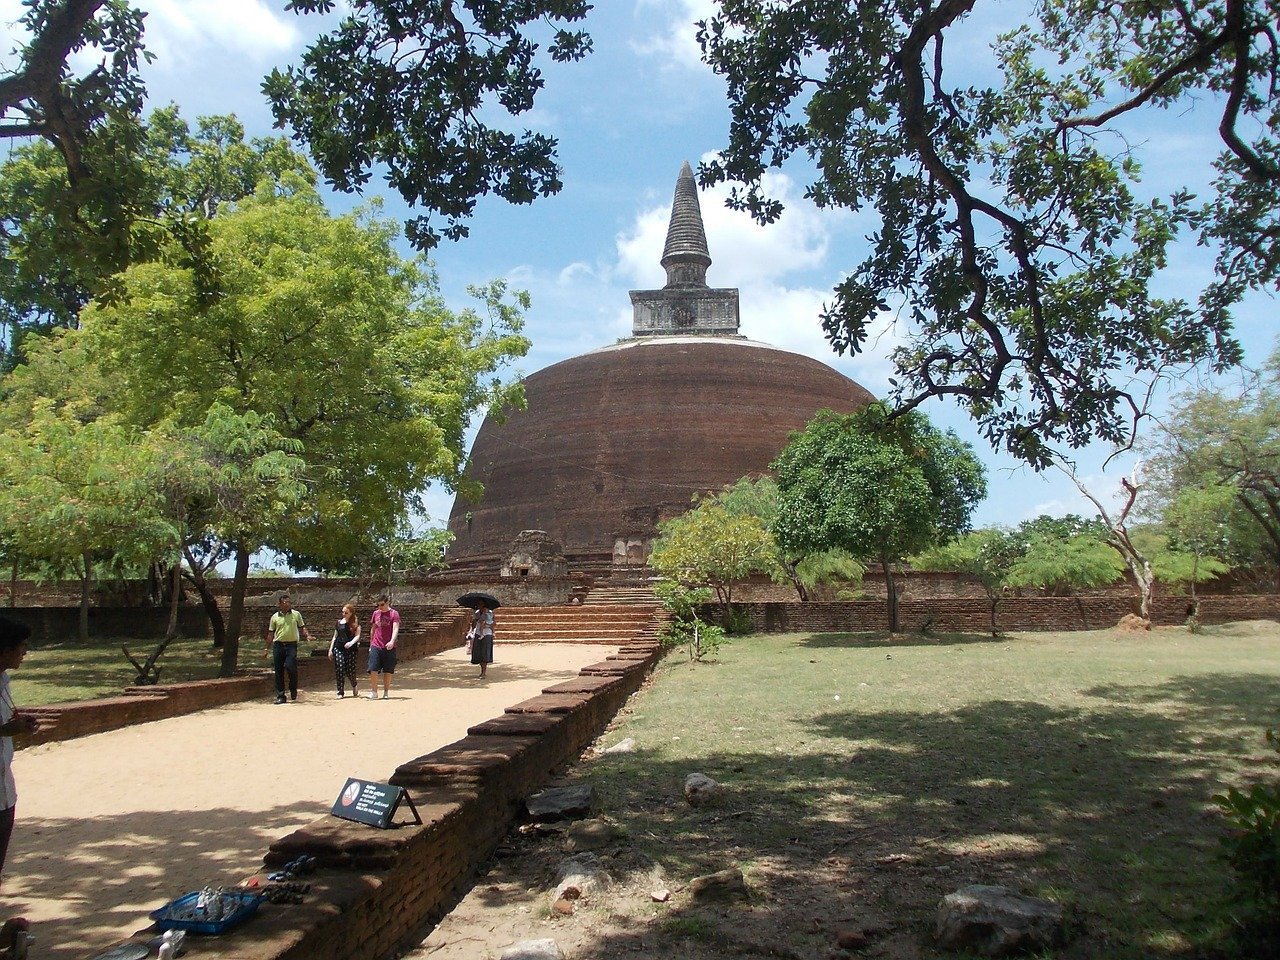 Polonnaruwa is a UNESCO World Heritage Site in Sri Lanka and one of the best attractions in Sri Lanka